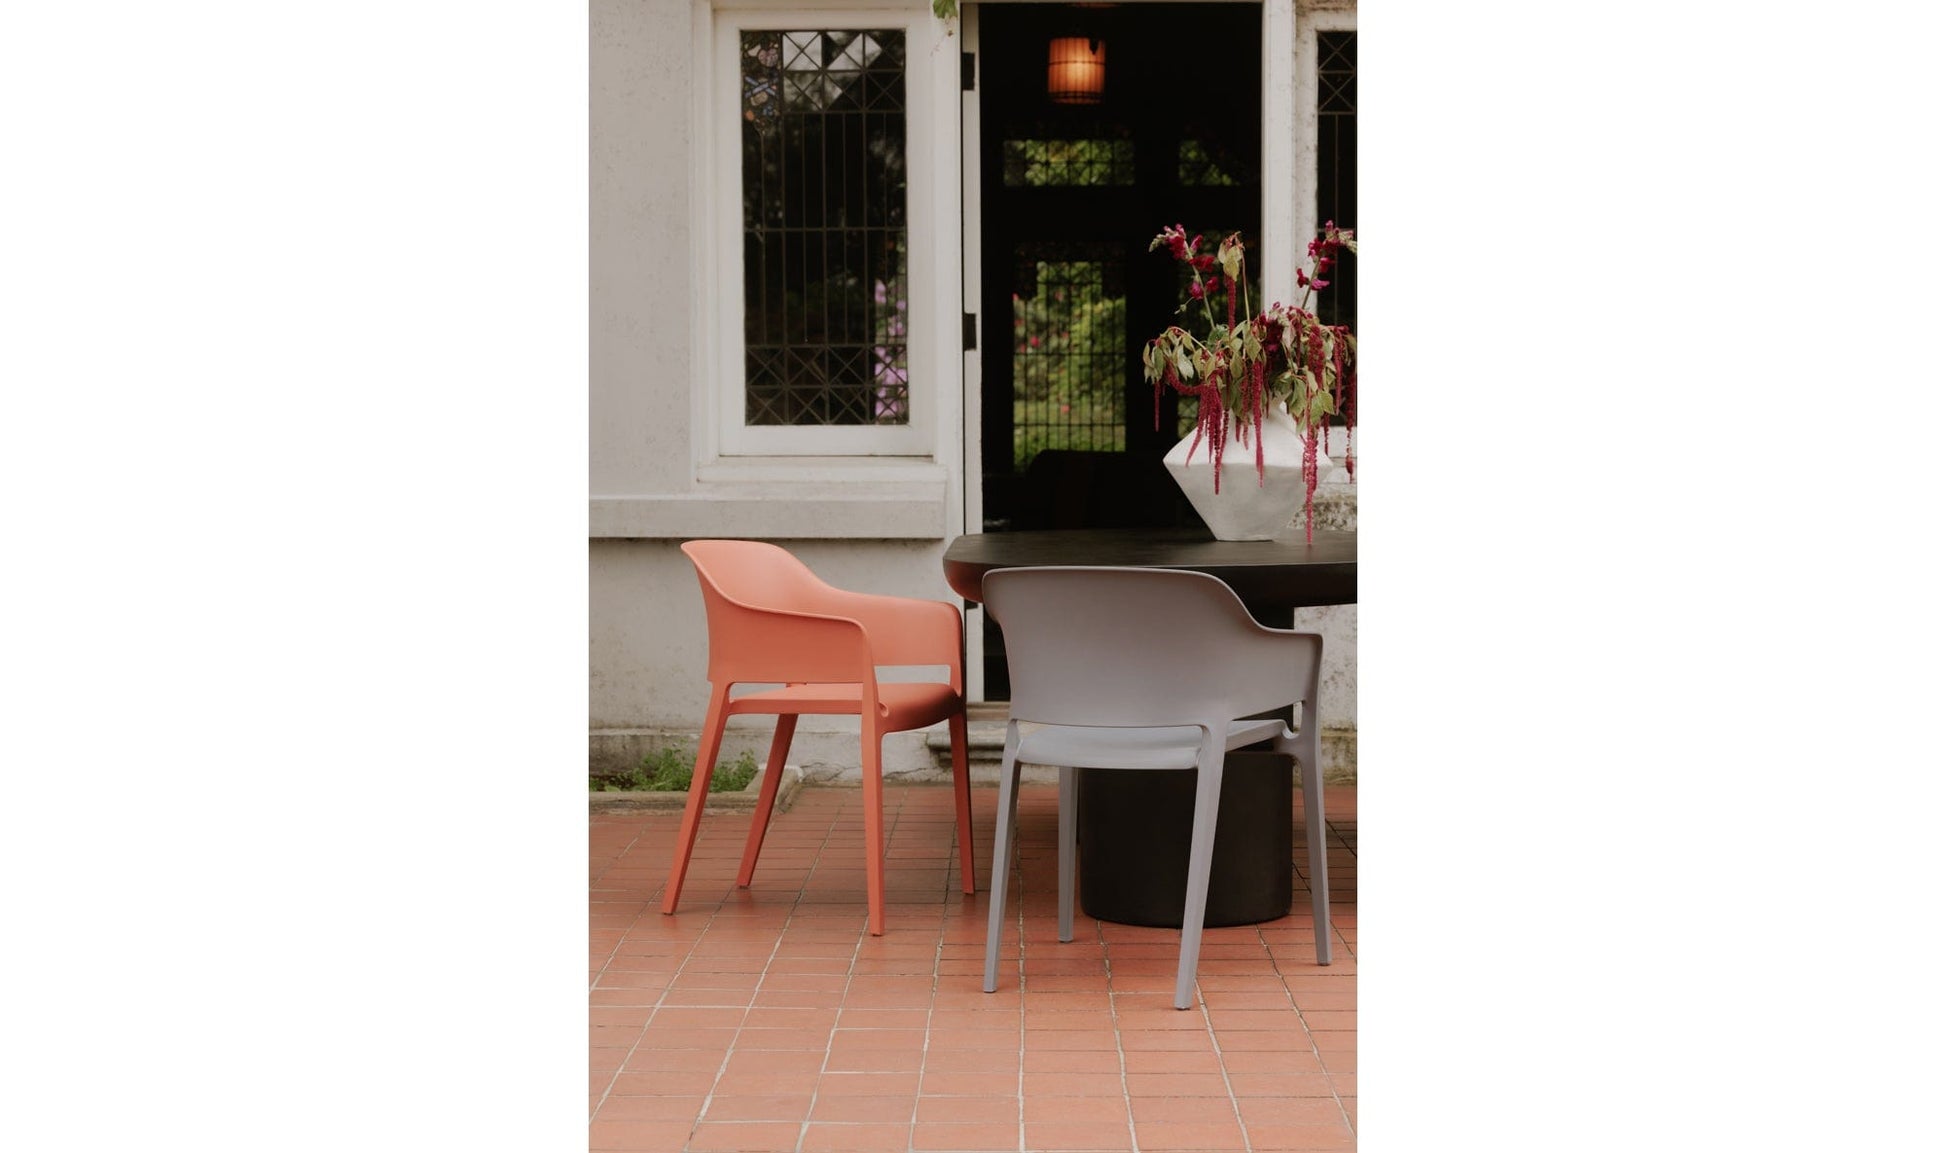 Moe's FARO OUTDOOR DINING CHAIR- SET OF TWO